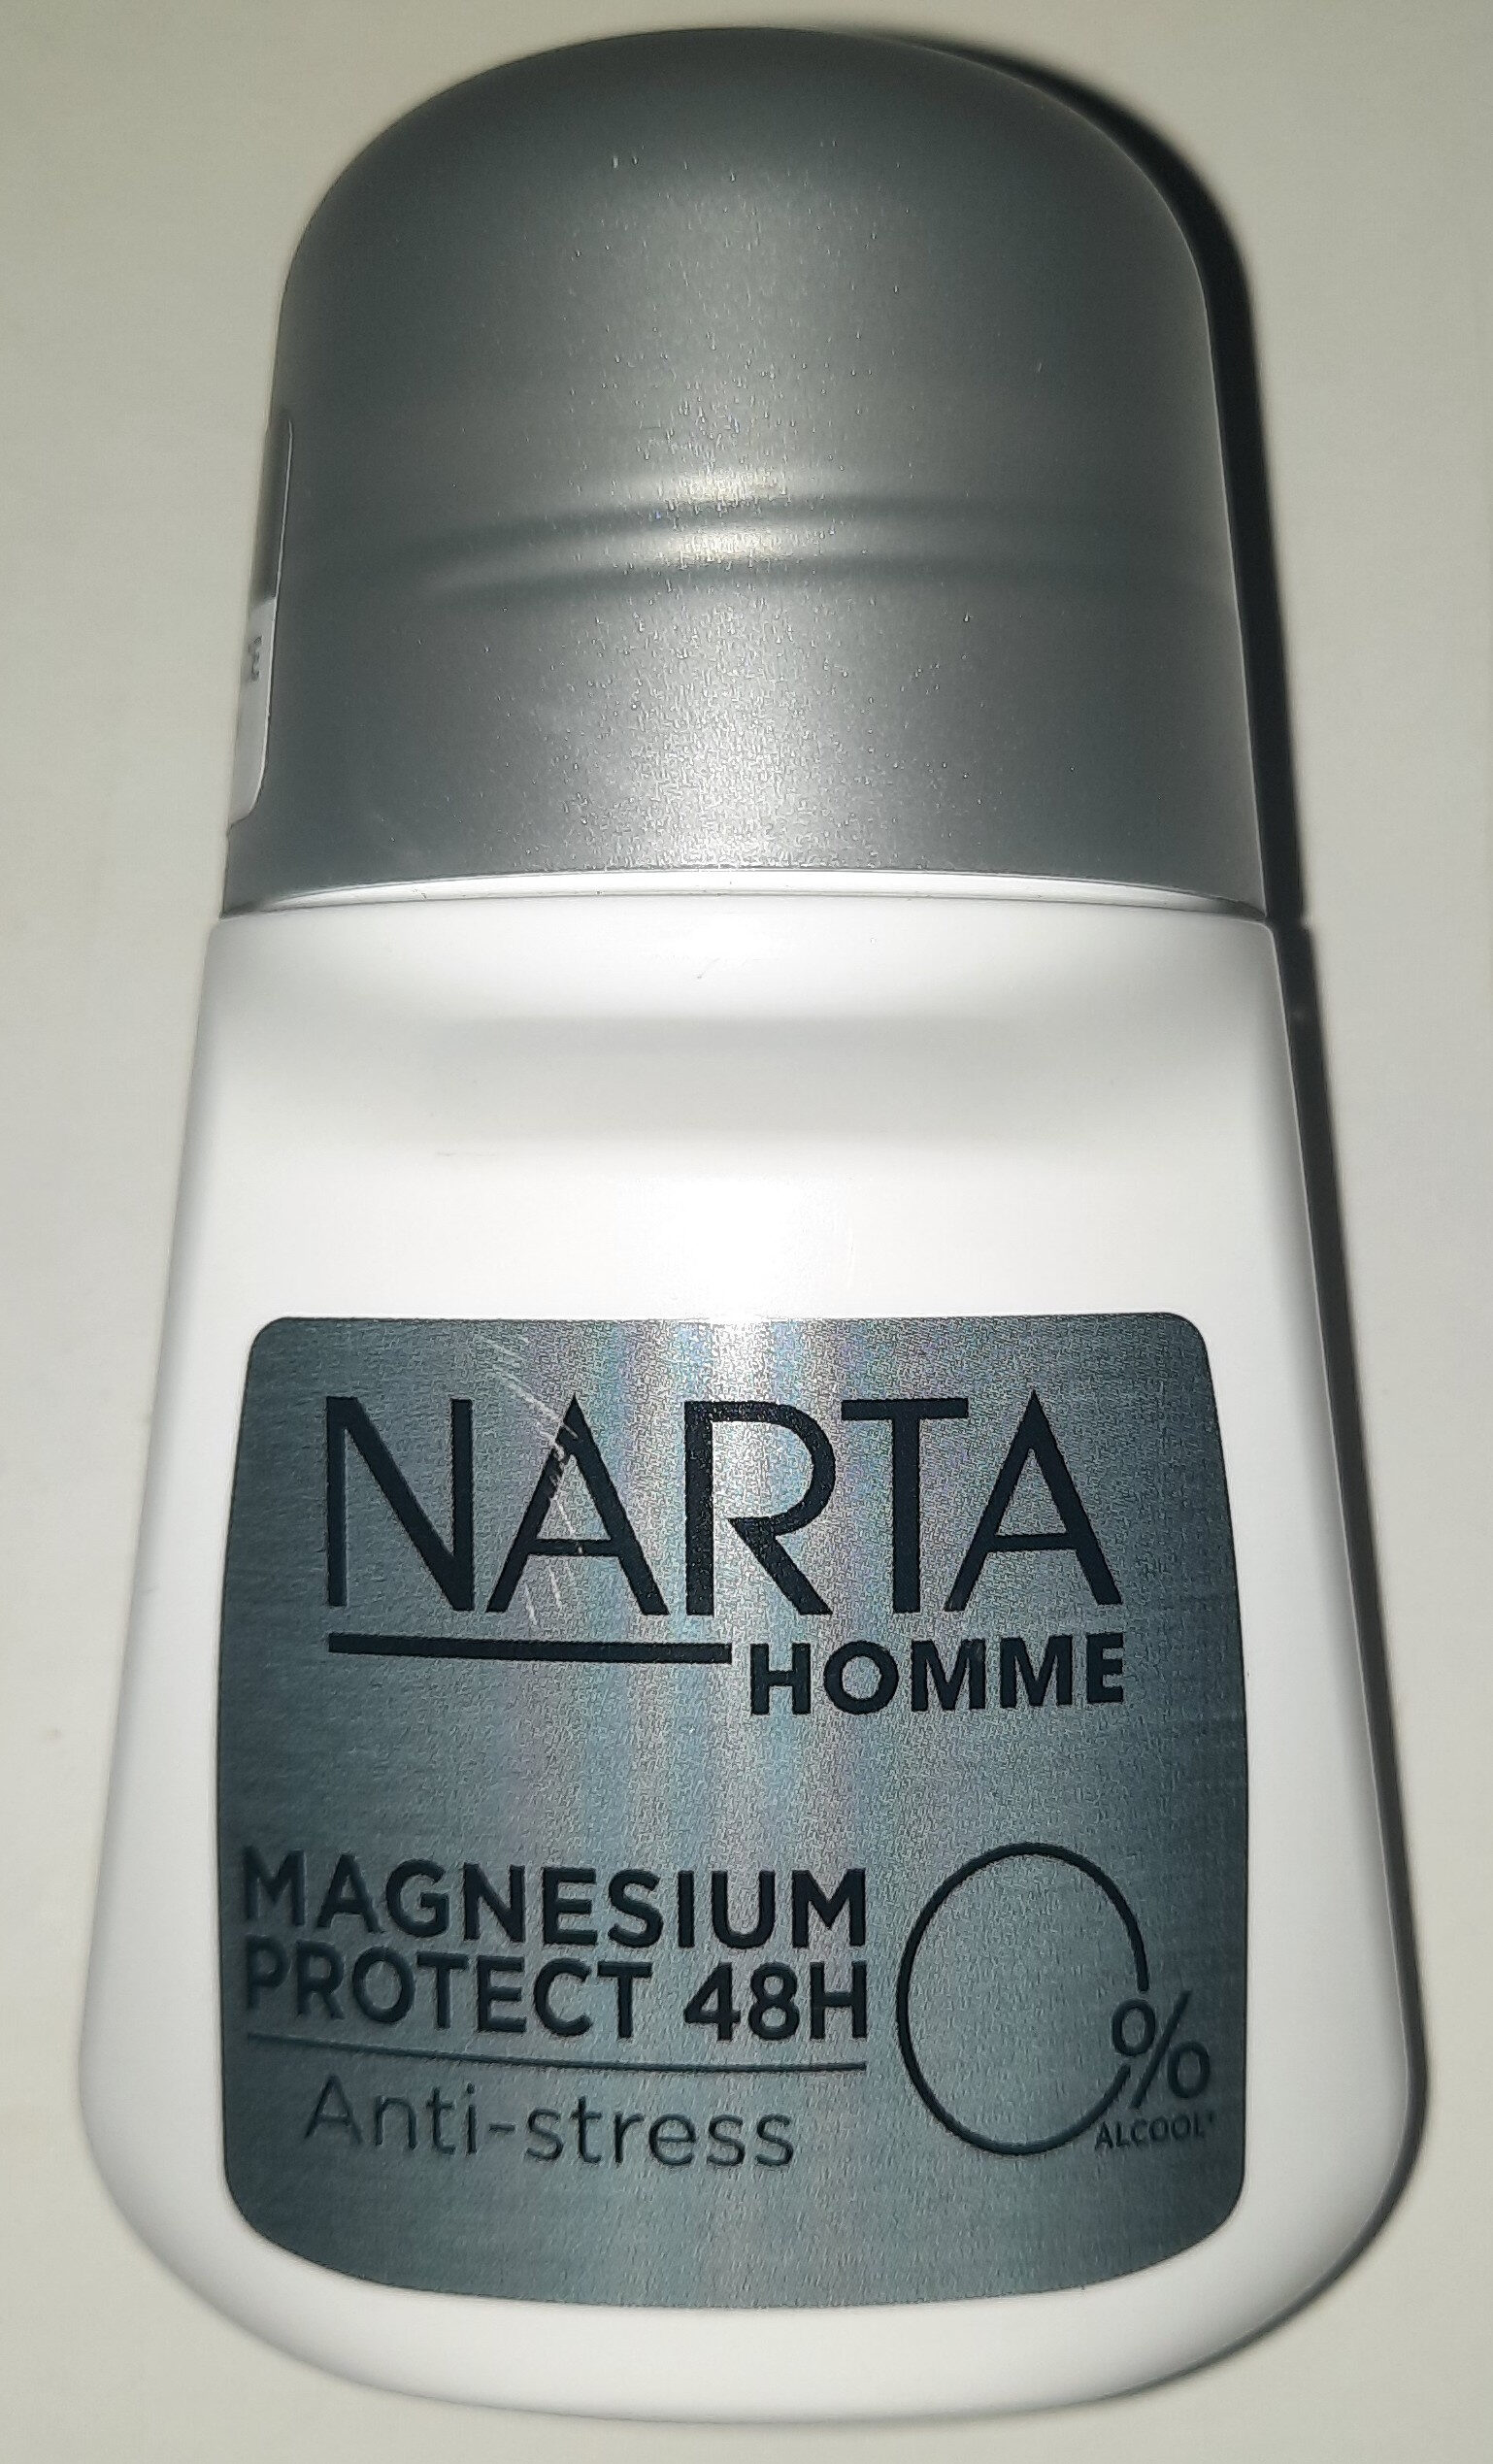 Narta Home Magnesium Protect 48h - Product - en